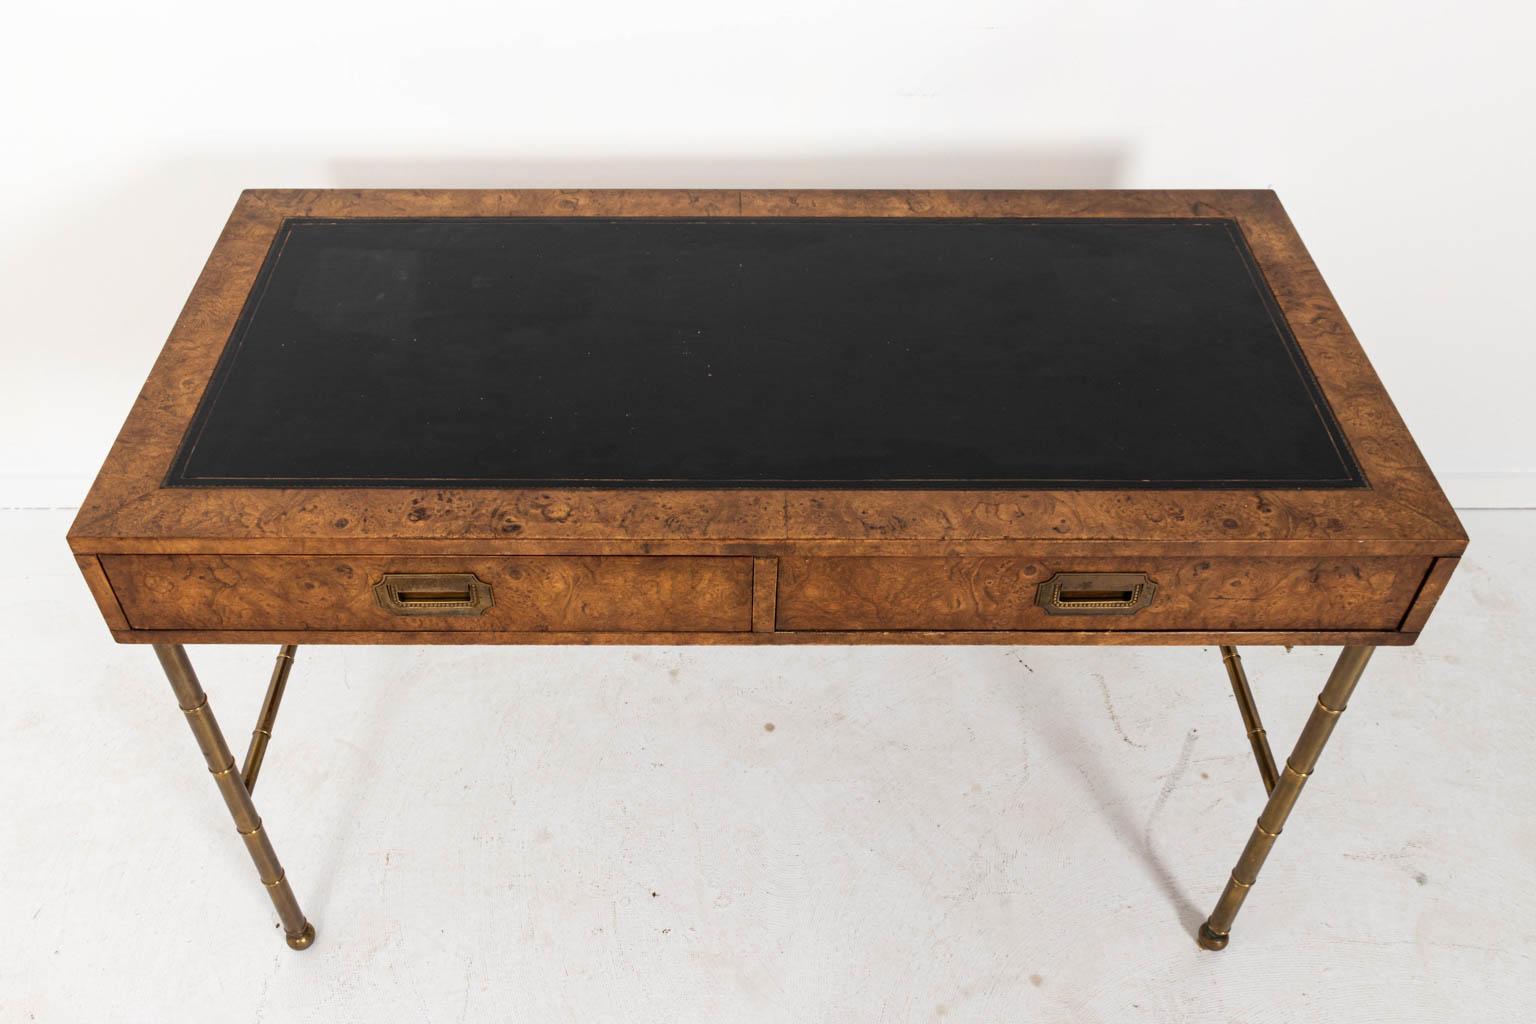 Midcentury Burlwood Desk with Leather Top by Mastercraft  1